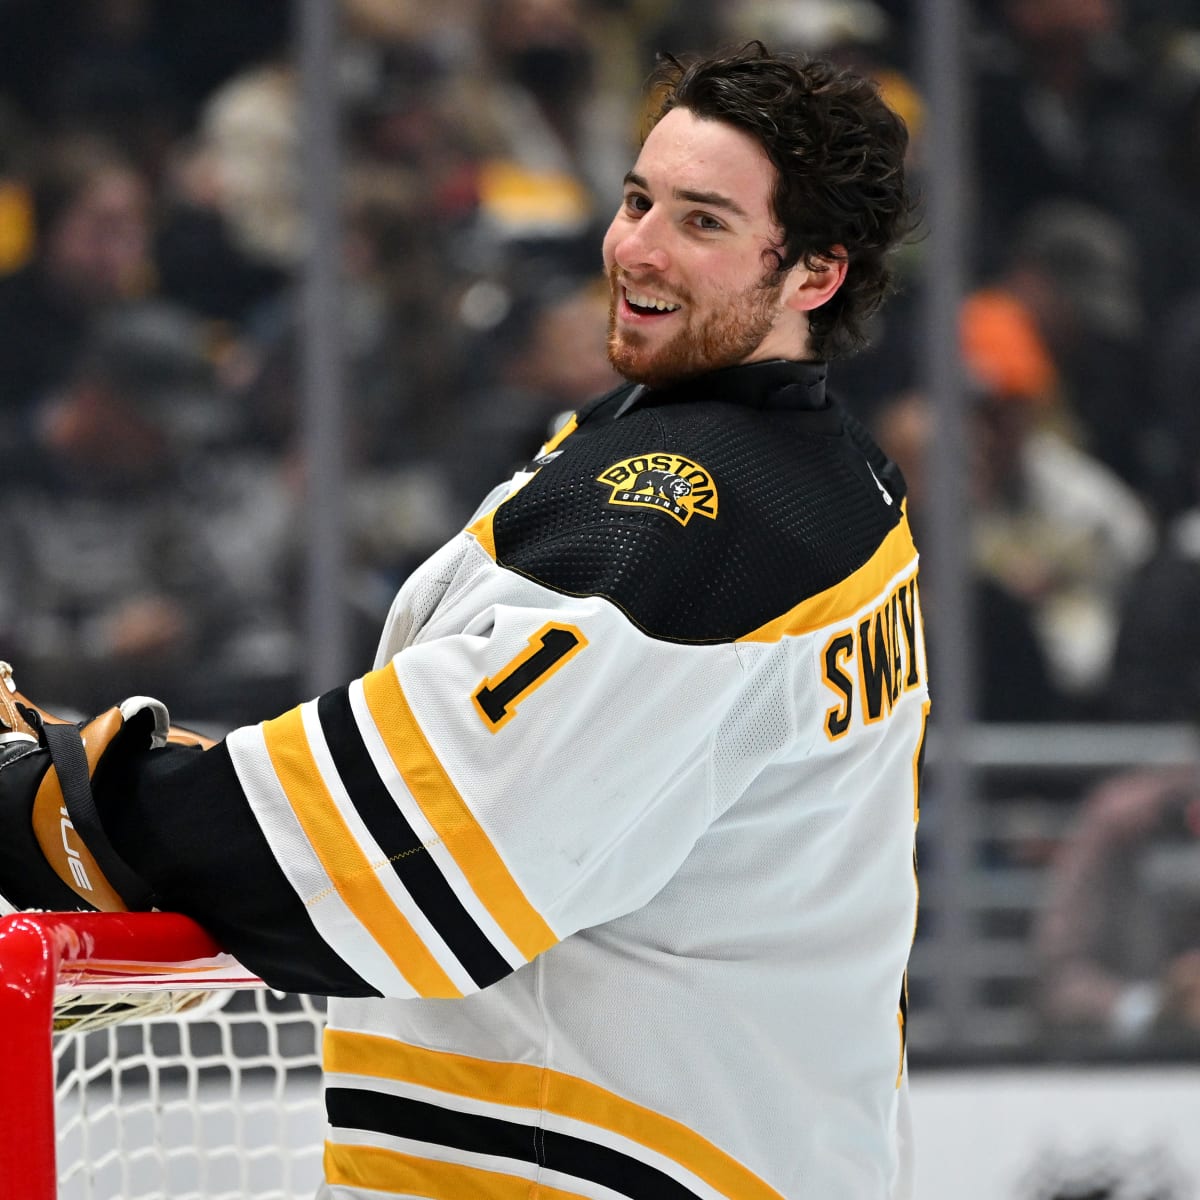 Swayman is awarded $3.475 million in arbitration, while the Bruins